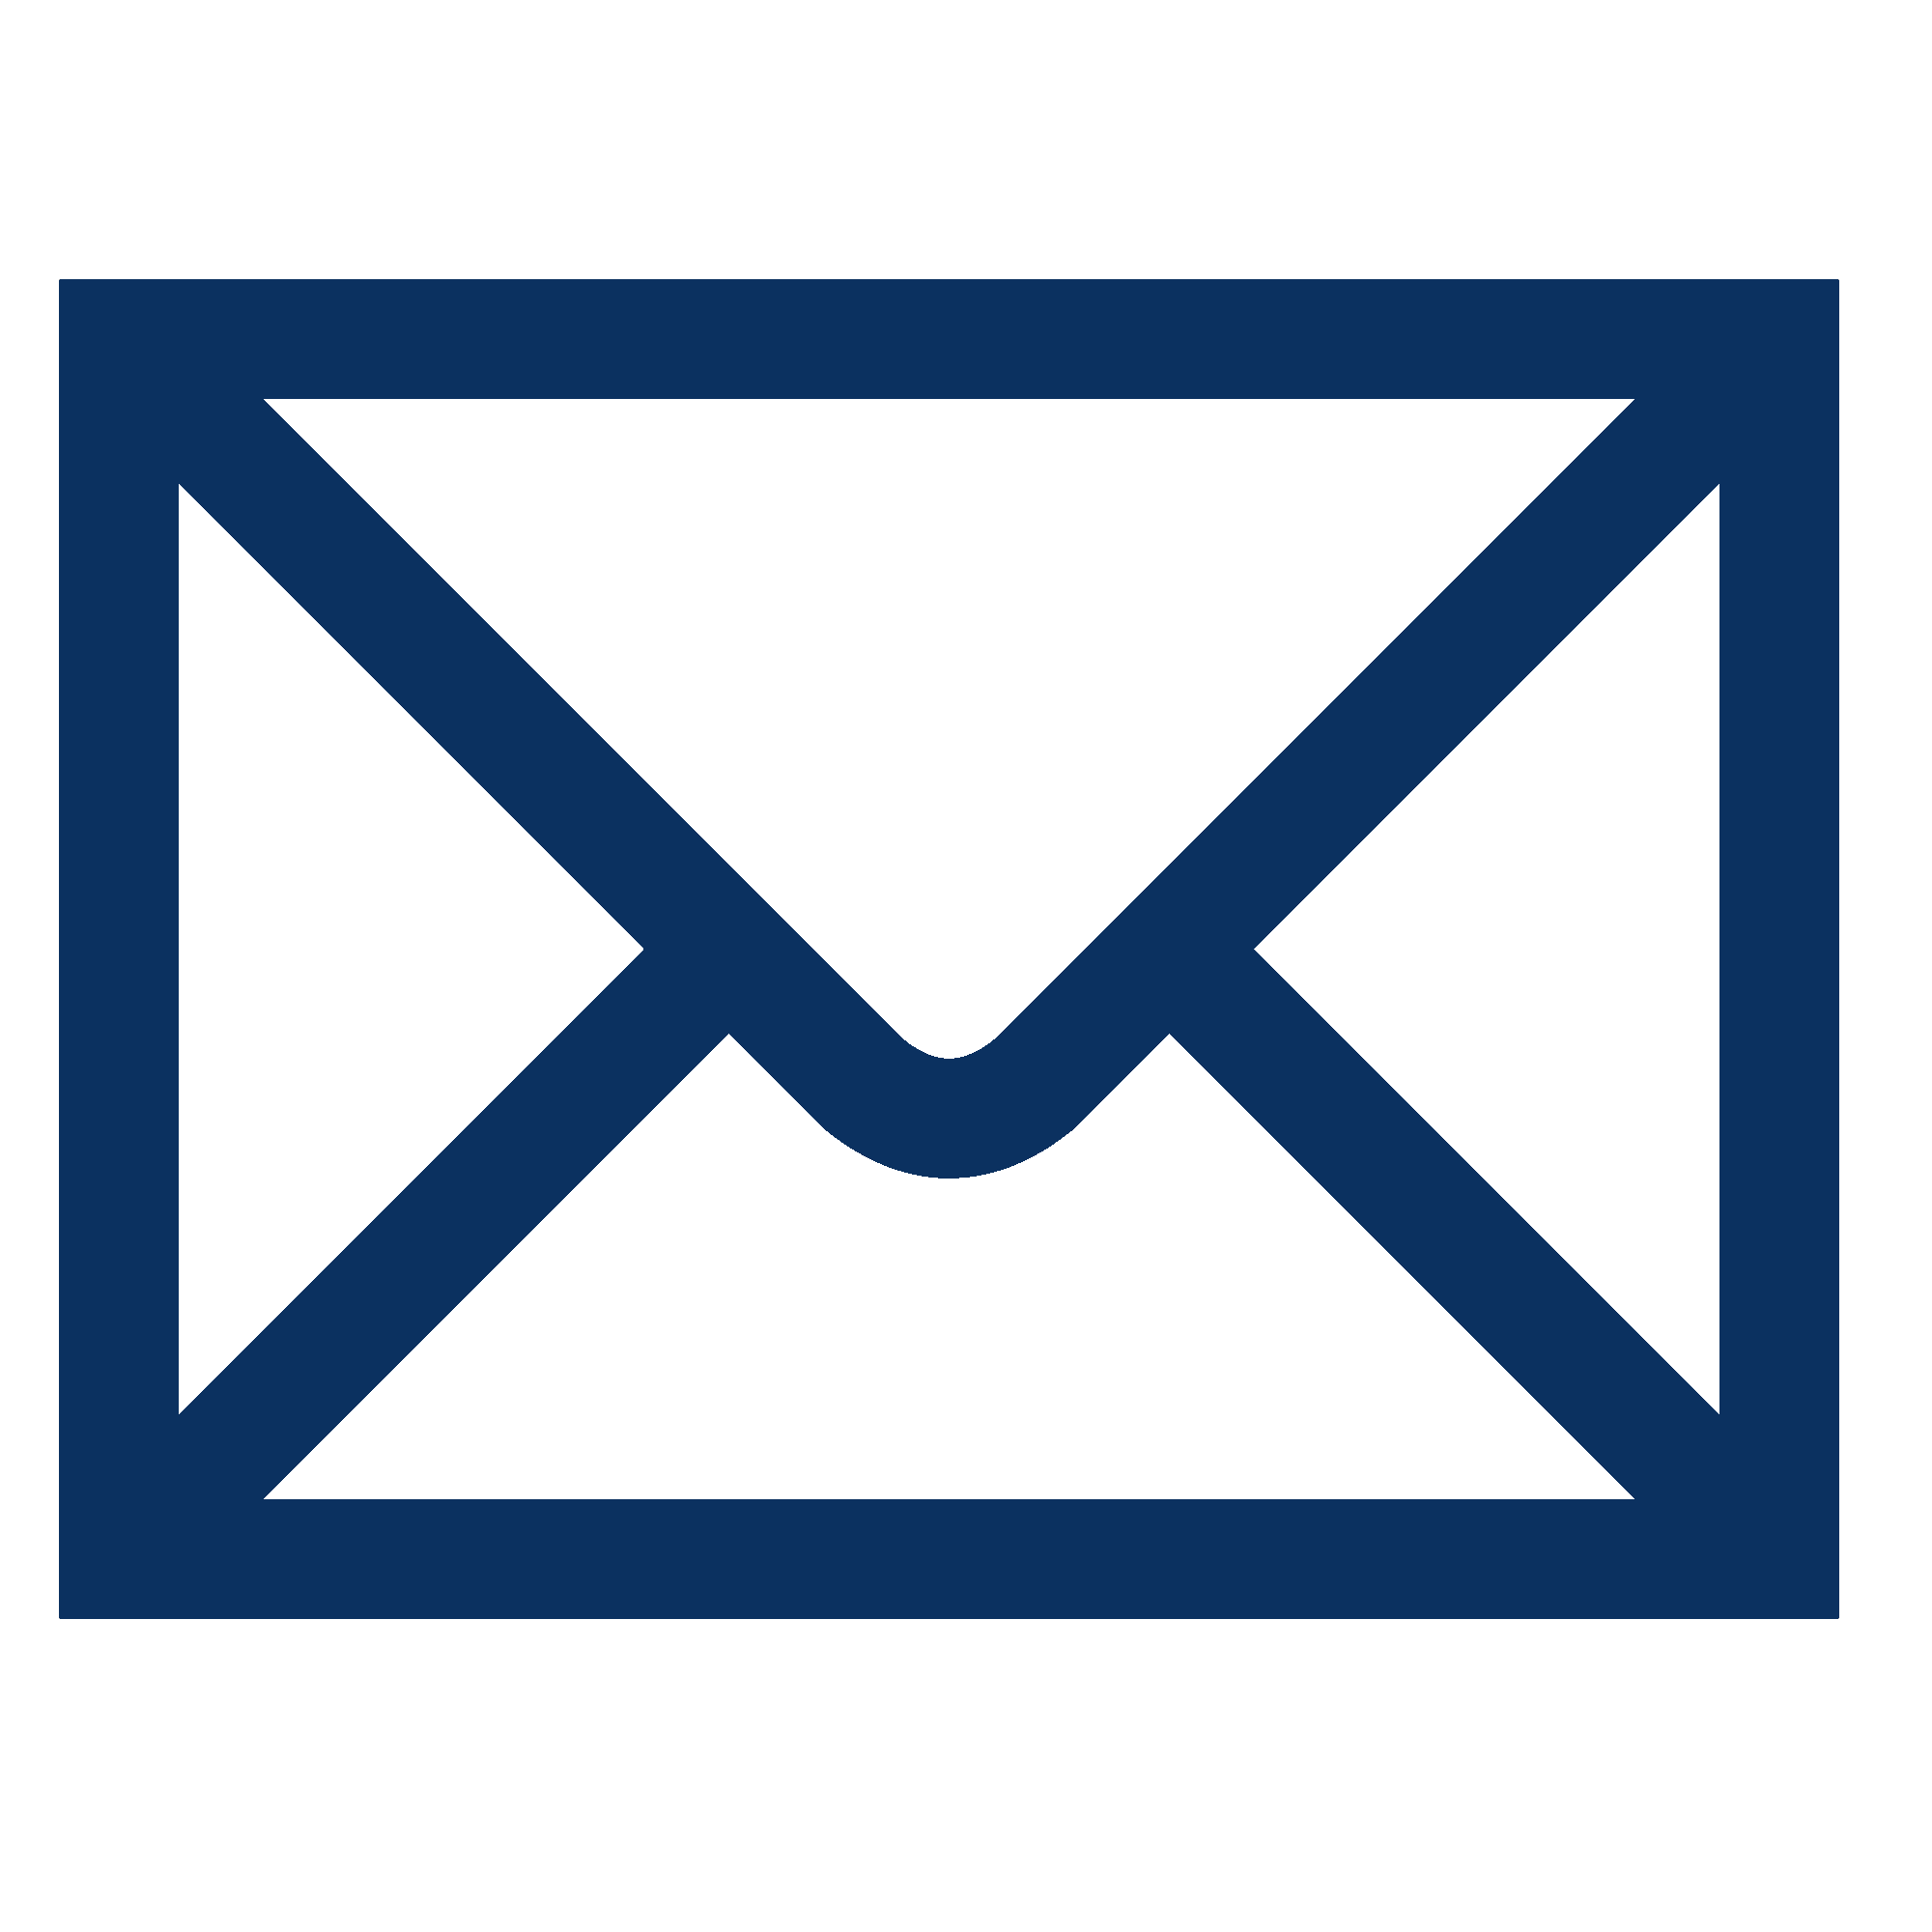 email-logo-png-27.png (31 KB)